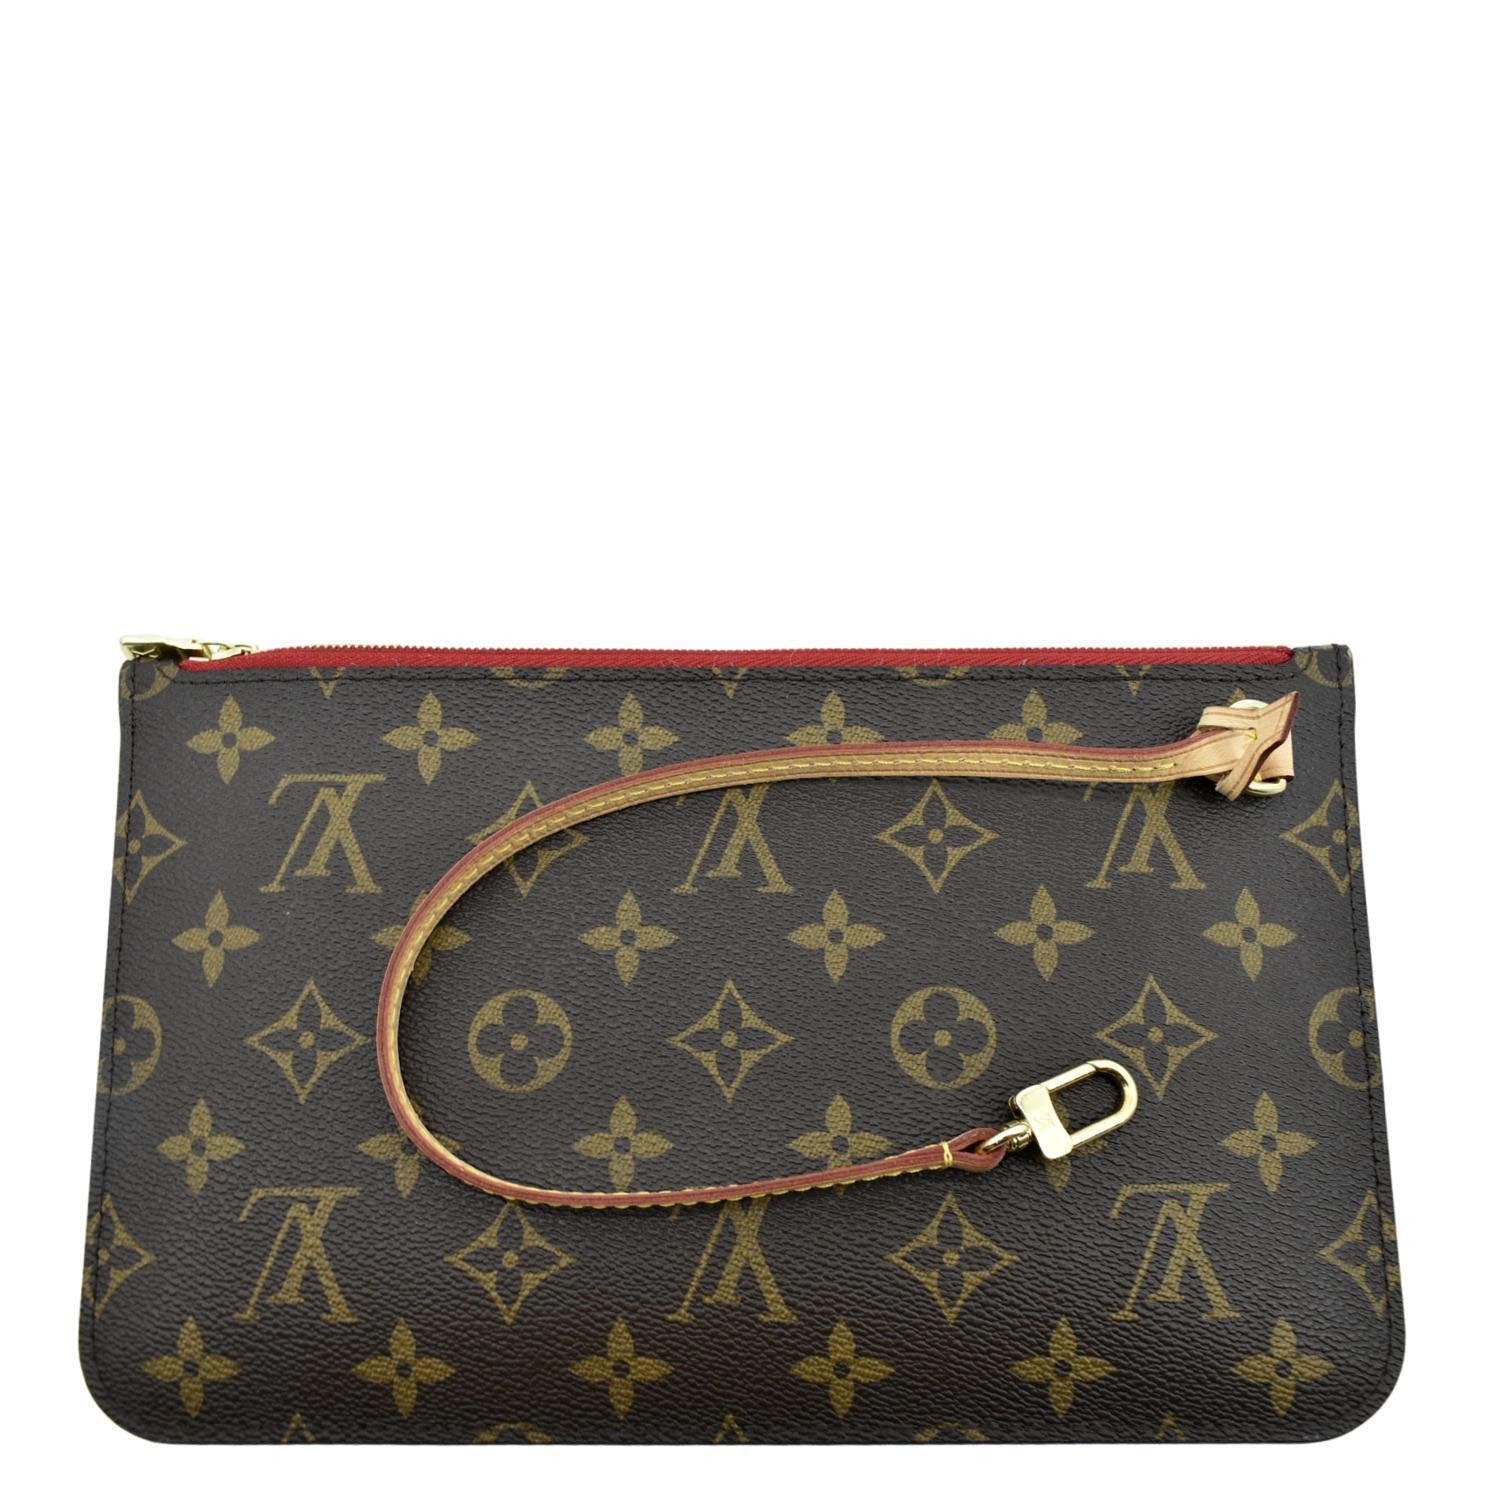 This Louis Vuitton Monogram Clutch Comes In A Set Of 3, Even